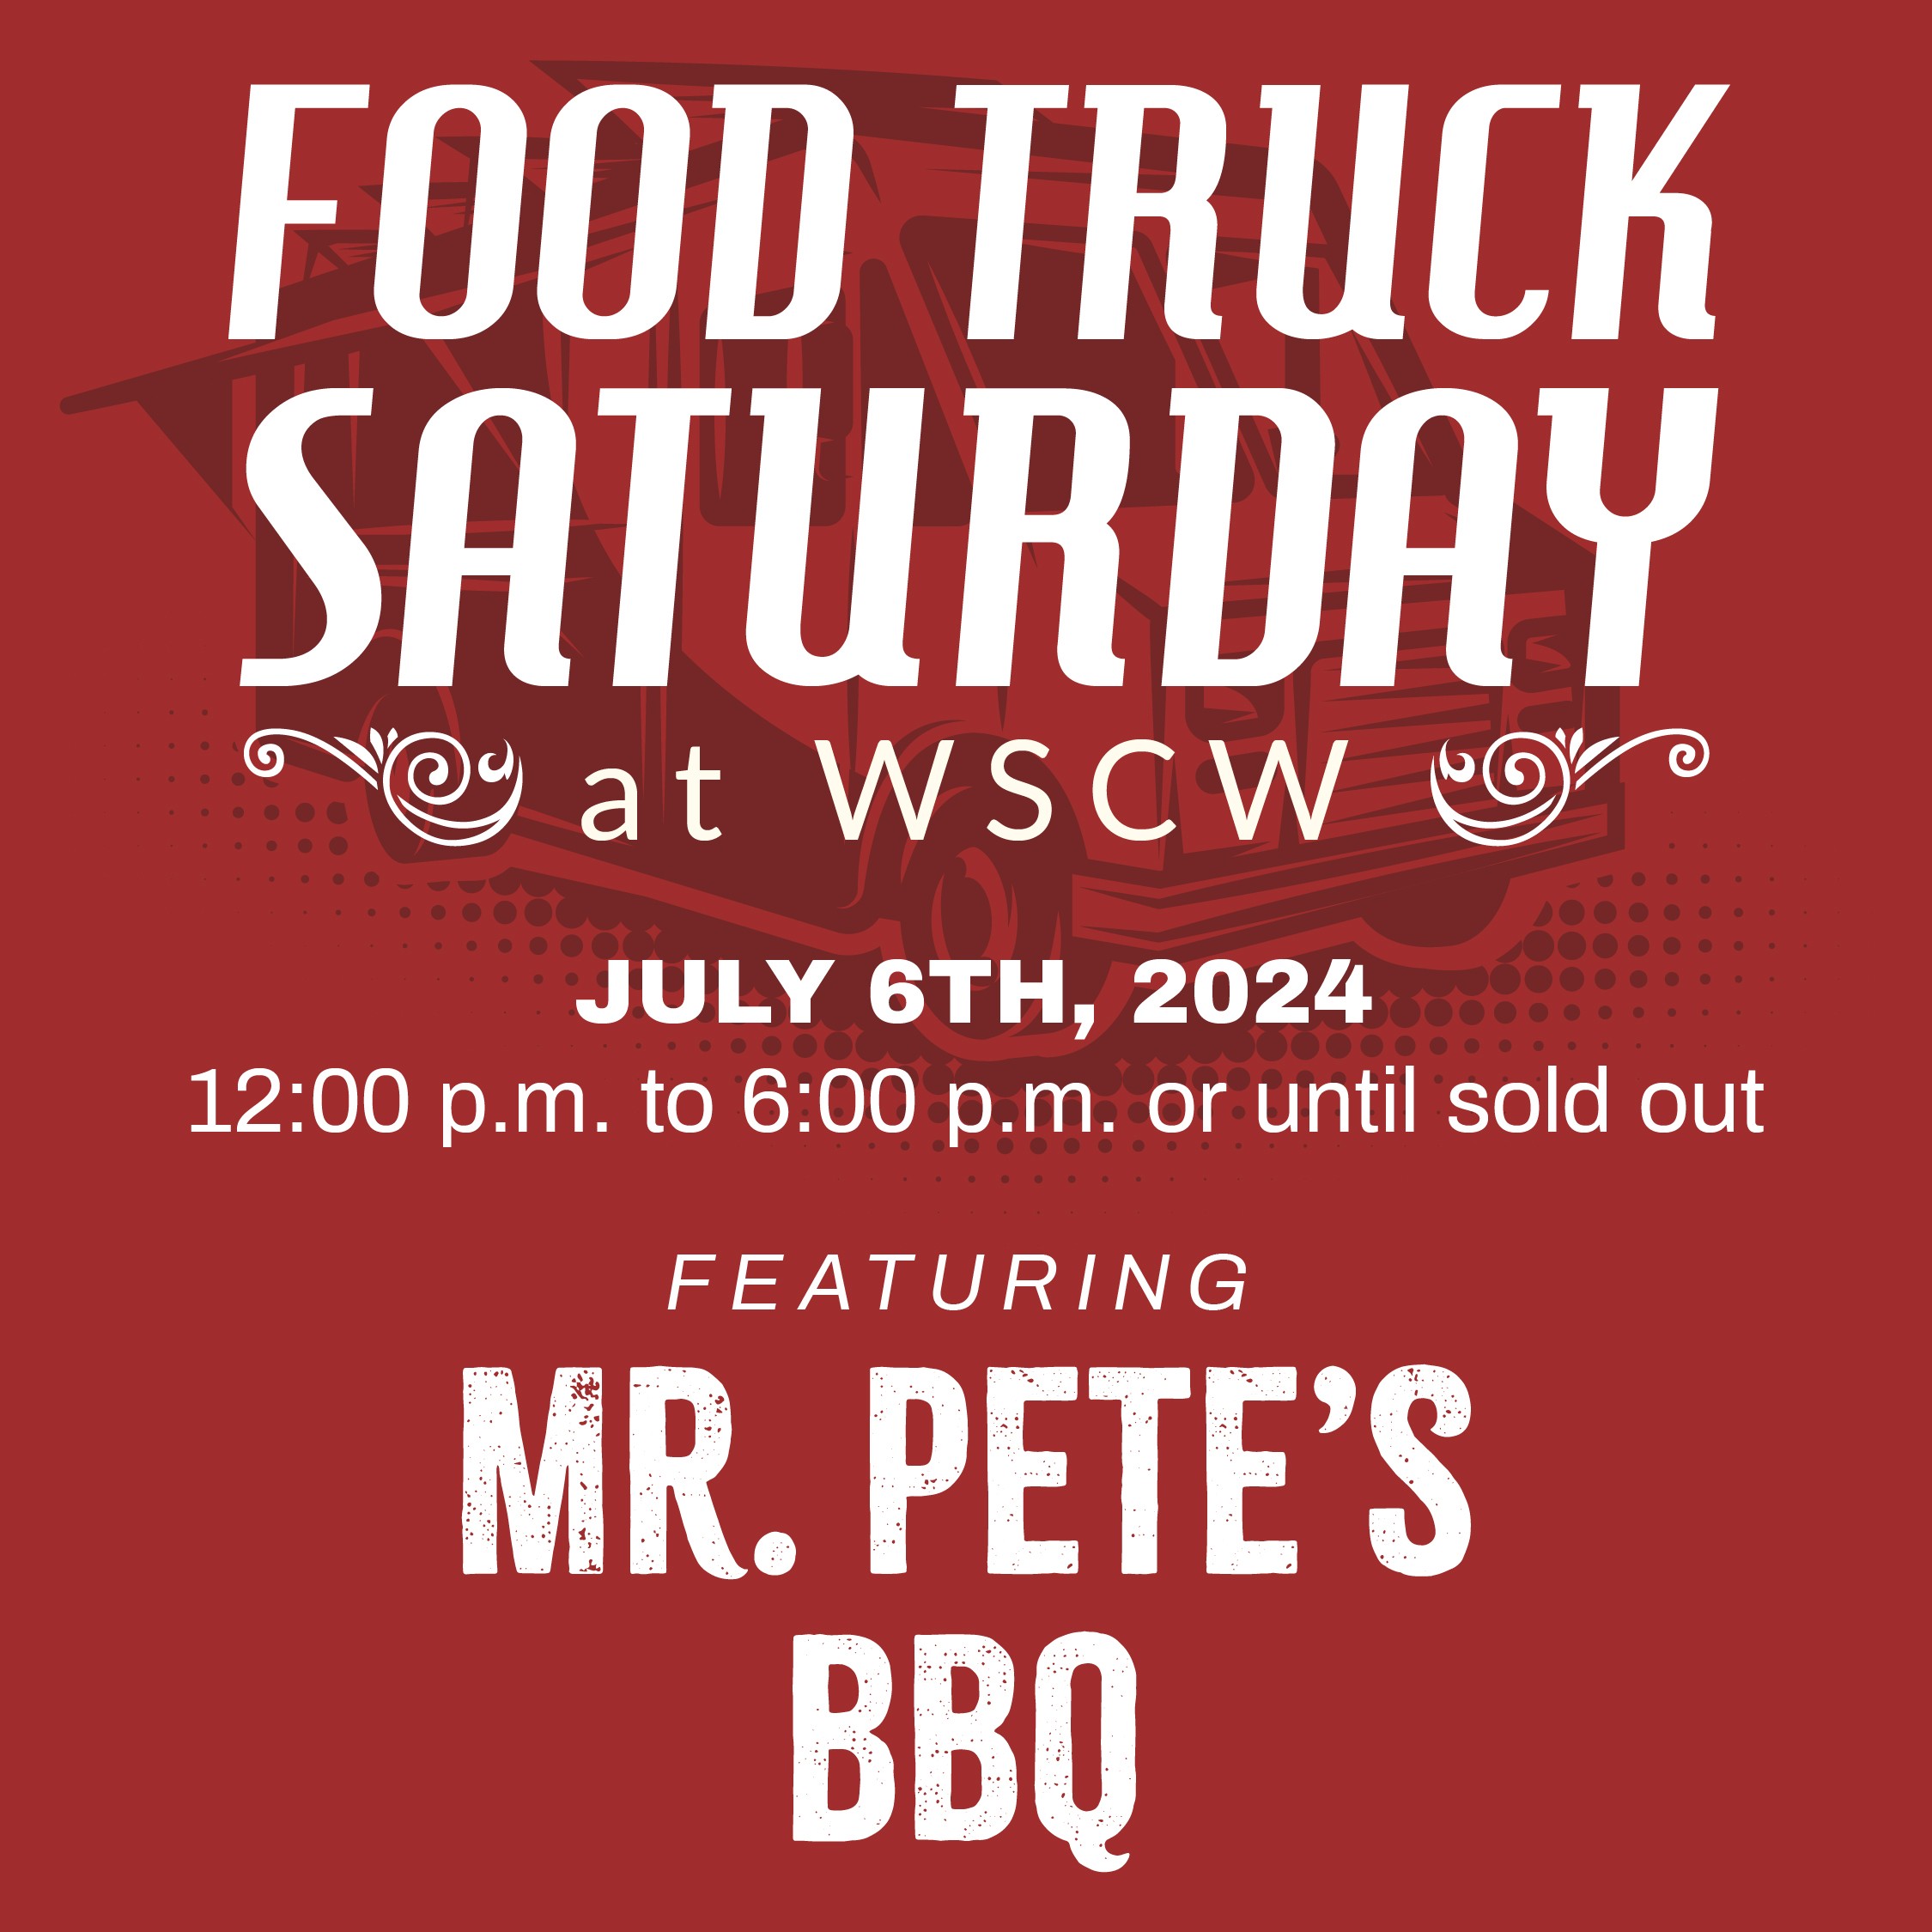 Mr. Pete's BBQ Food Truck at West Sandy Creek Winery - July 6, 2024